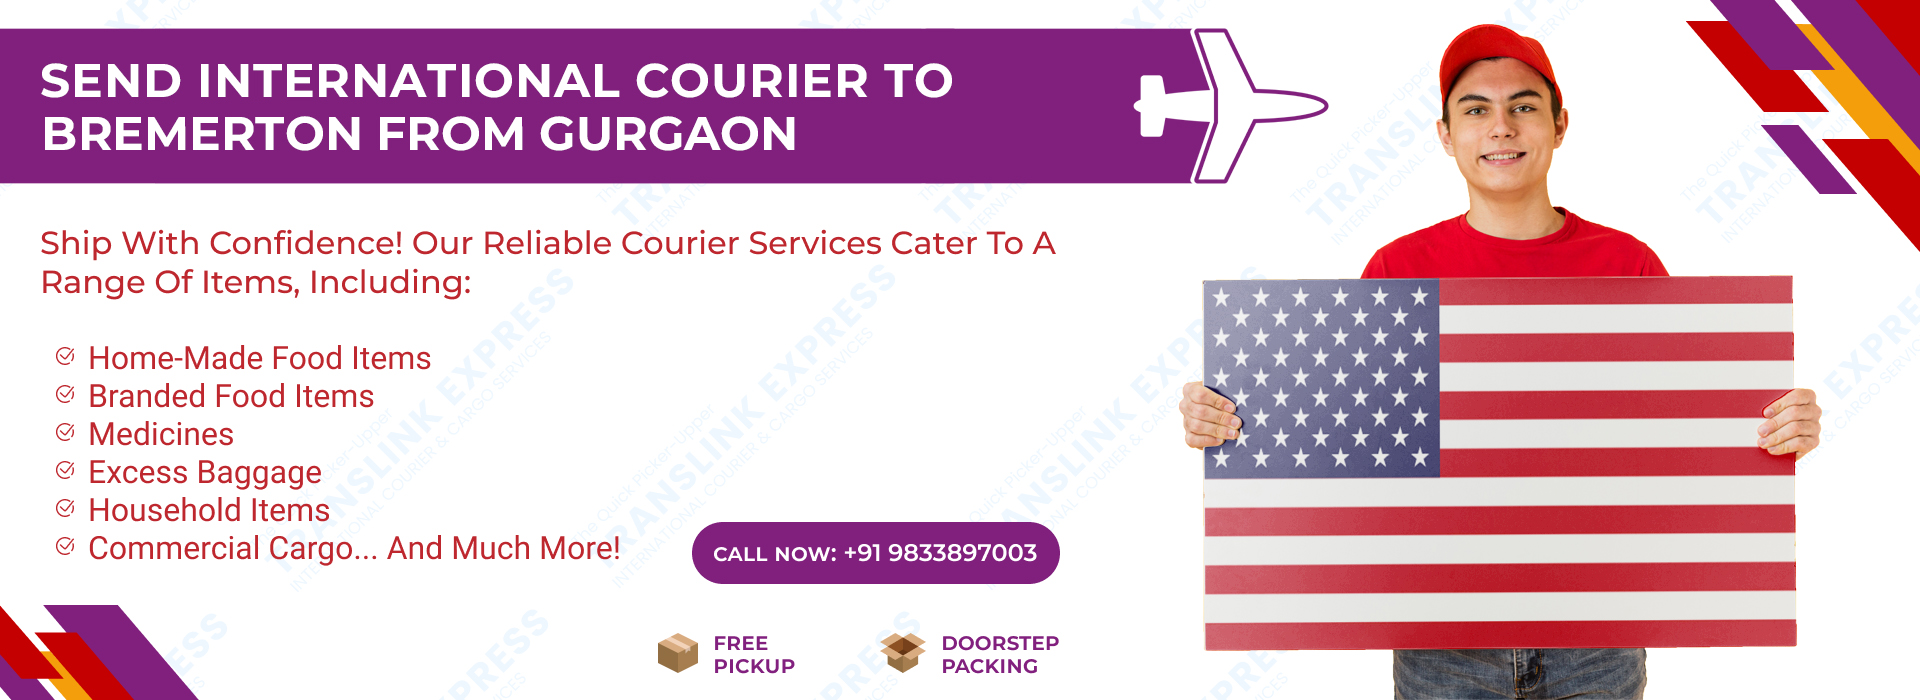 Courier to Bremerton From Gurgaon